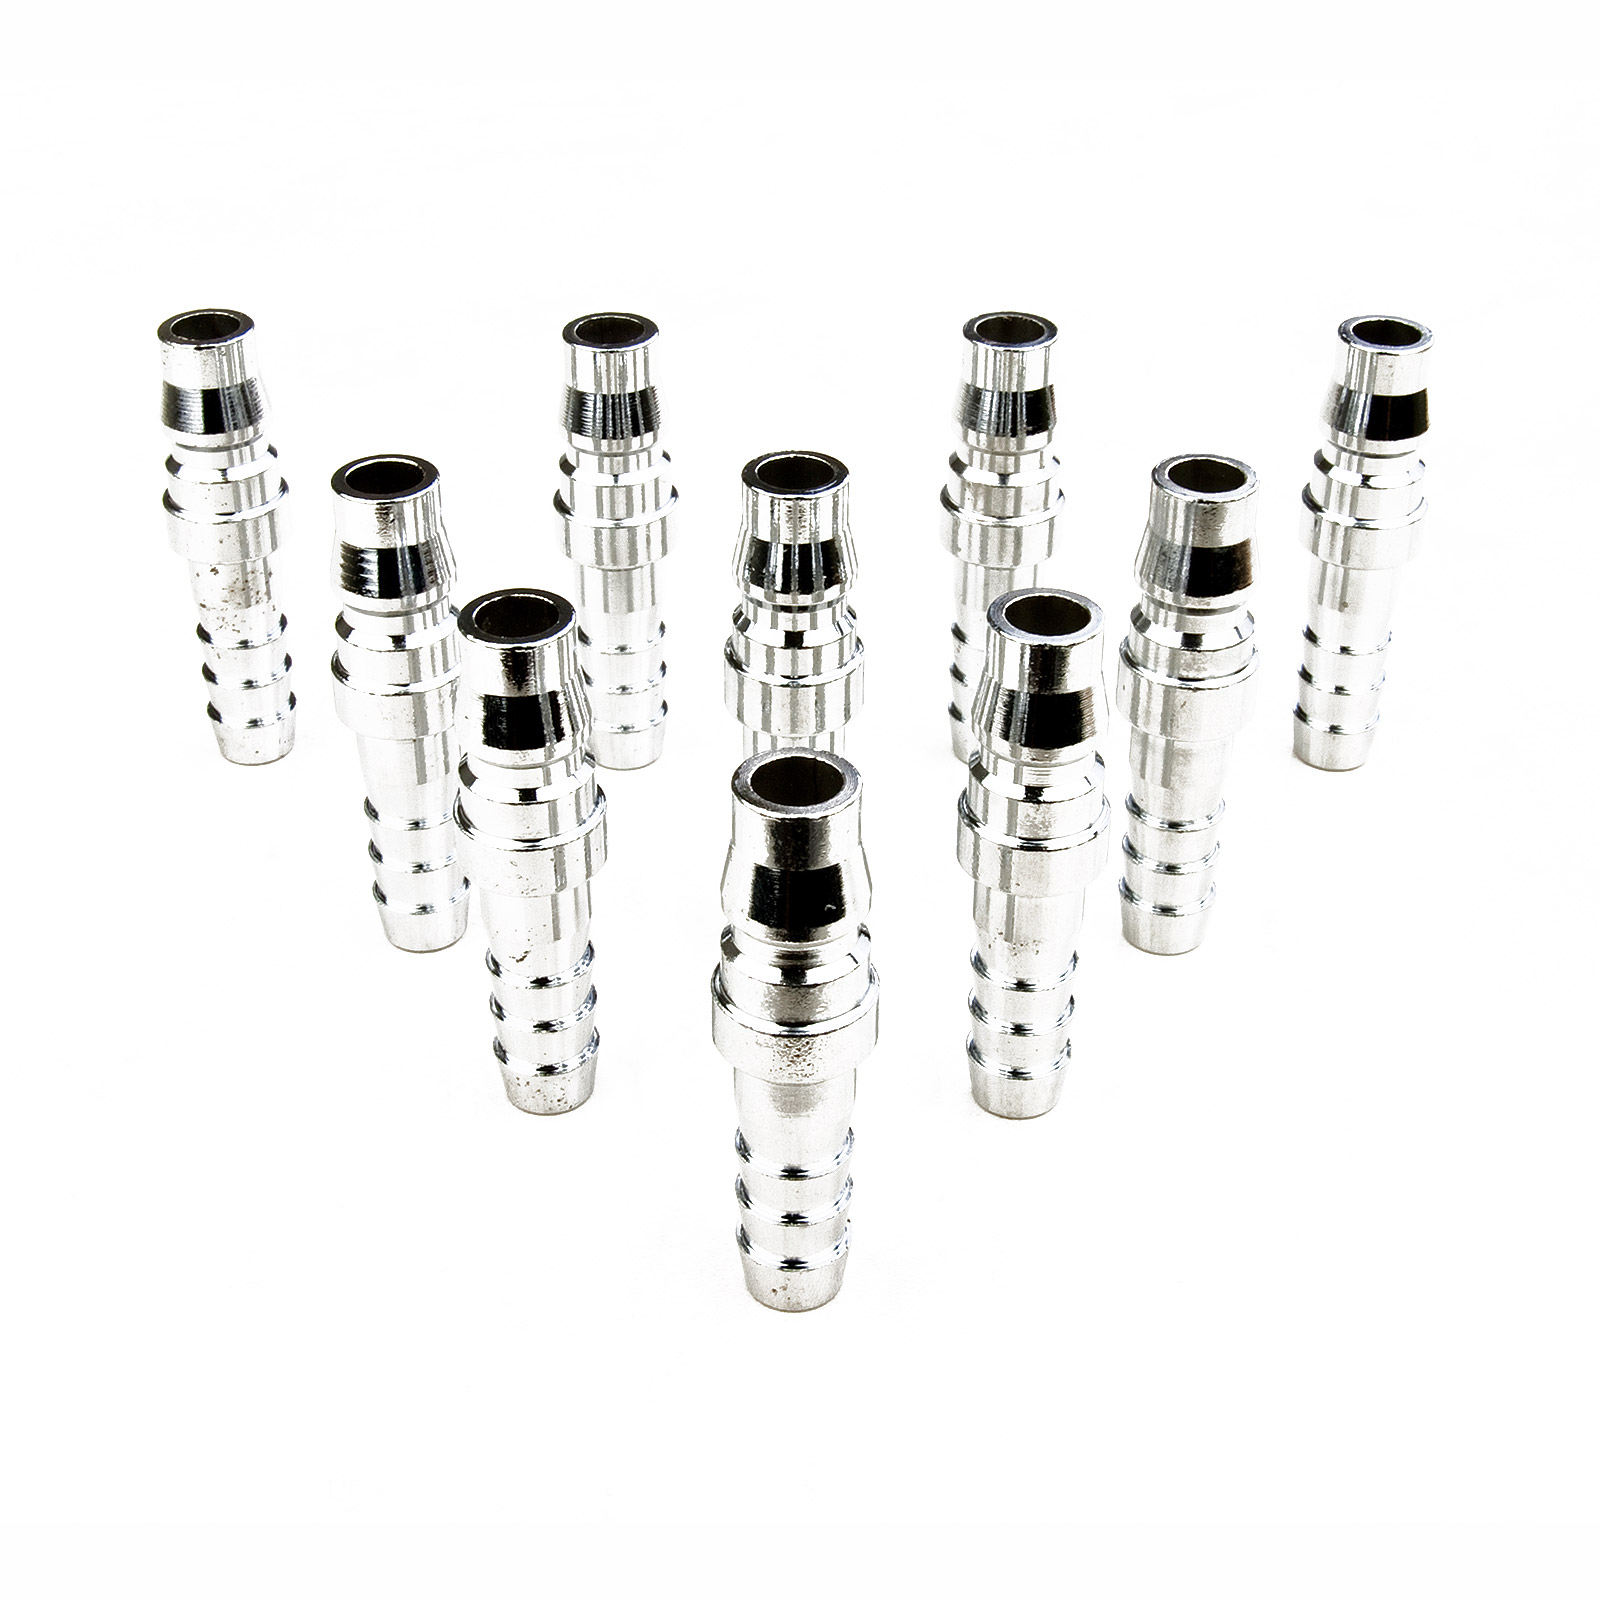 10X 1/4" Air Nitto Connector Coupling Male 5 x 1.5cm